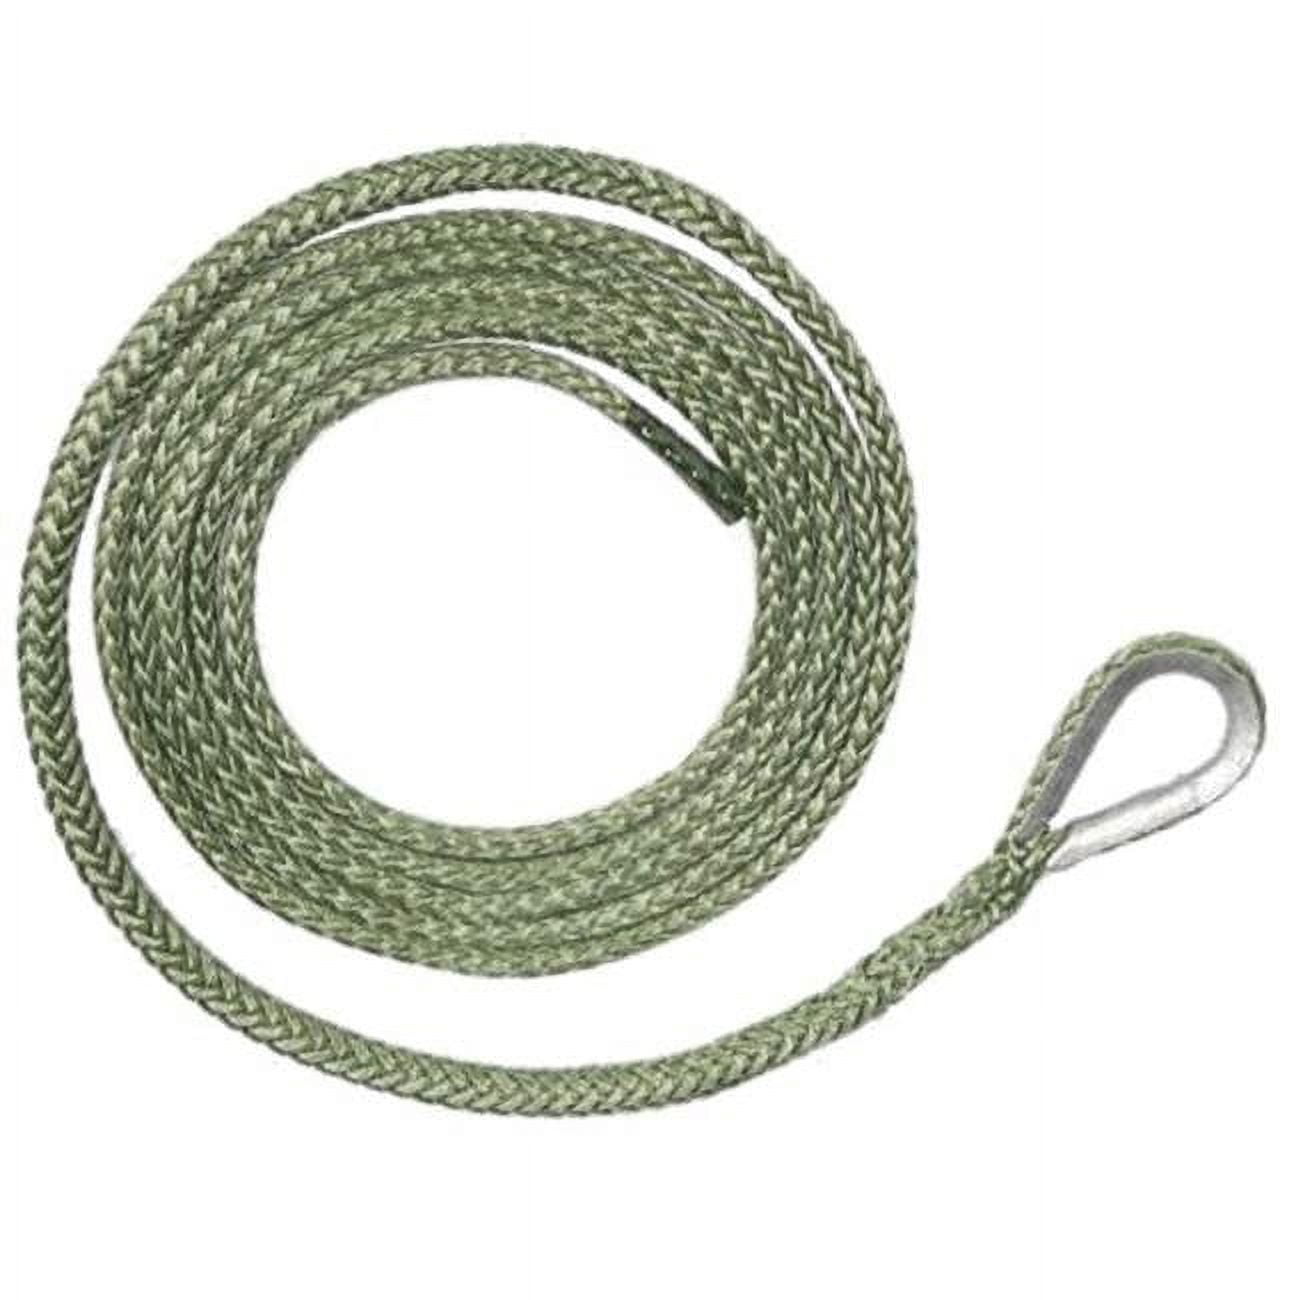 U.S. Made Amsteel Blue Plow Rope 1/4 inch x 10 ft (9 200 lb Strength) (4x4 Vehicle RECOVERY)